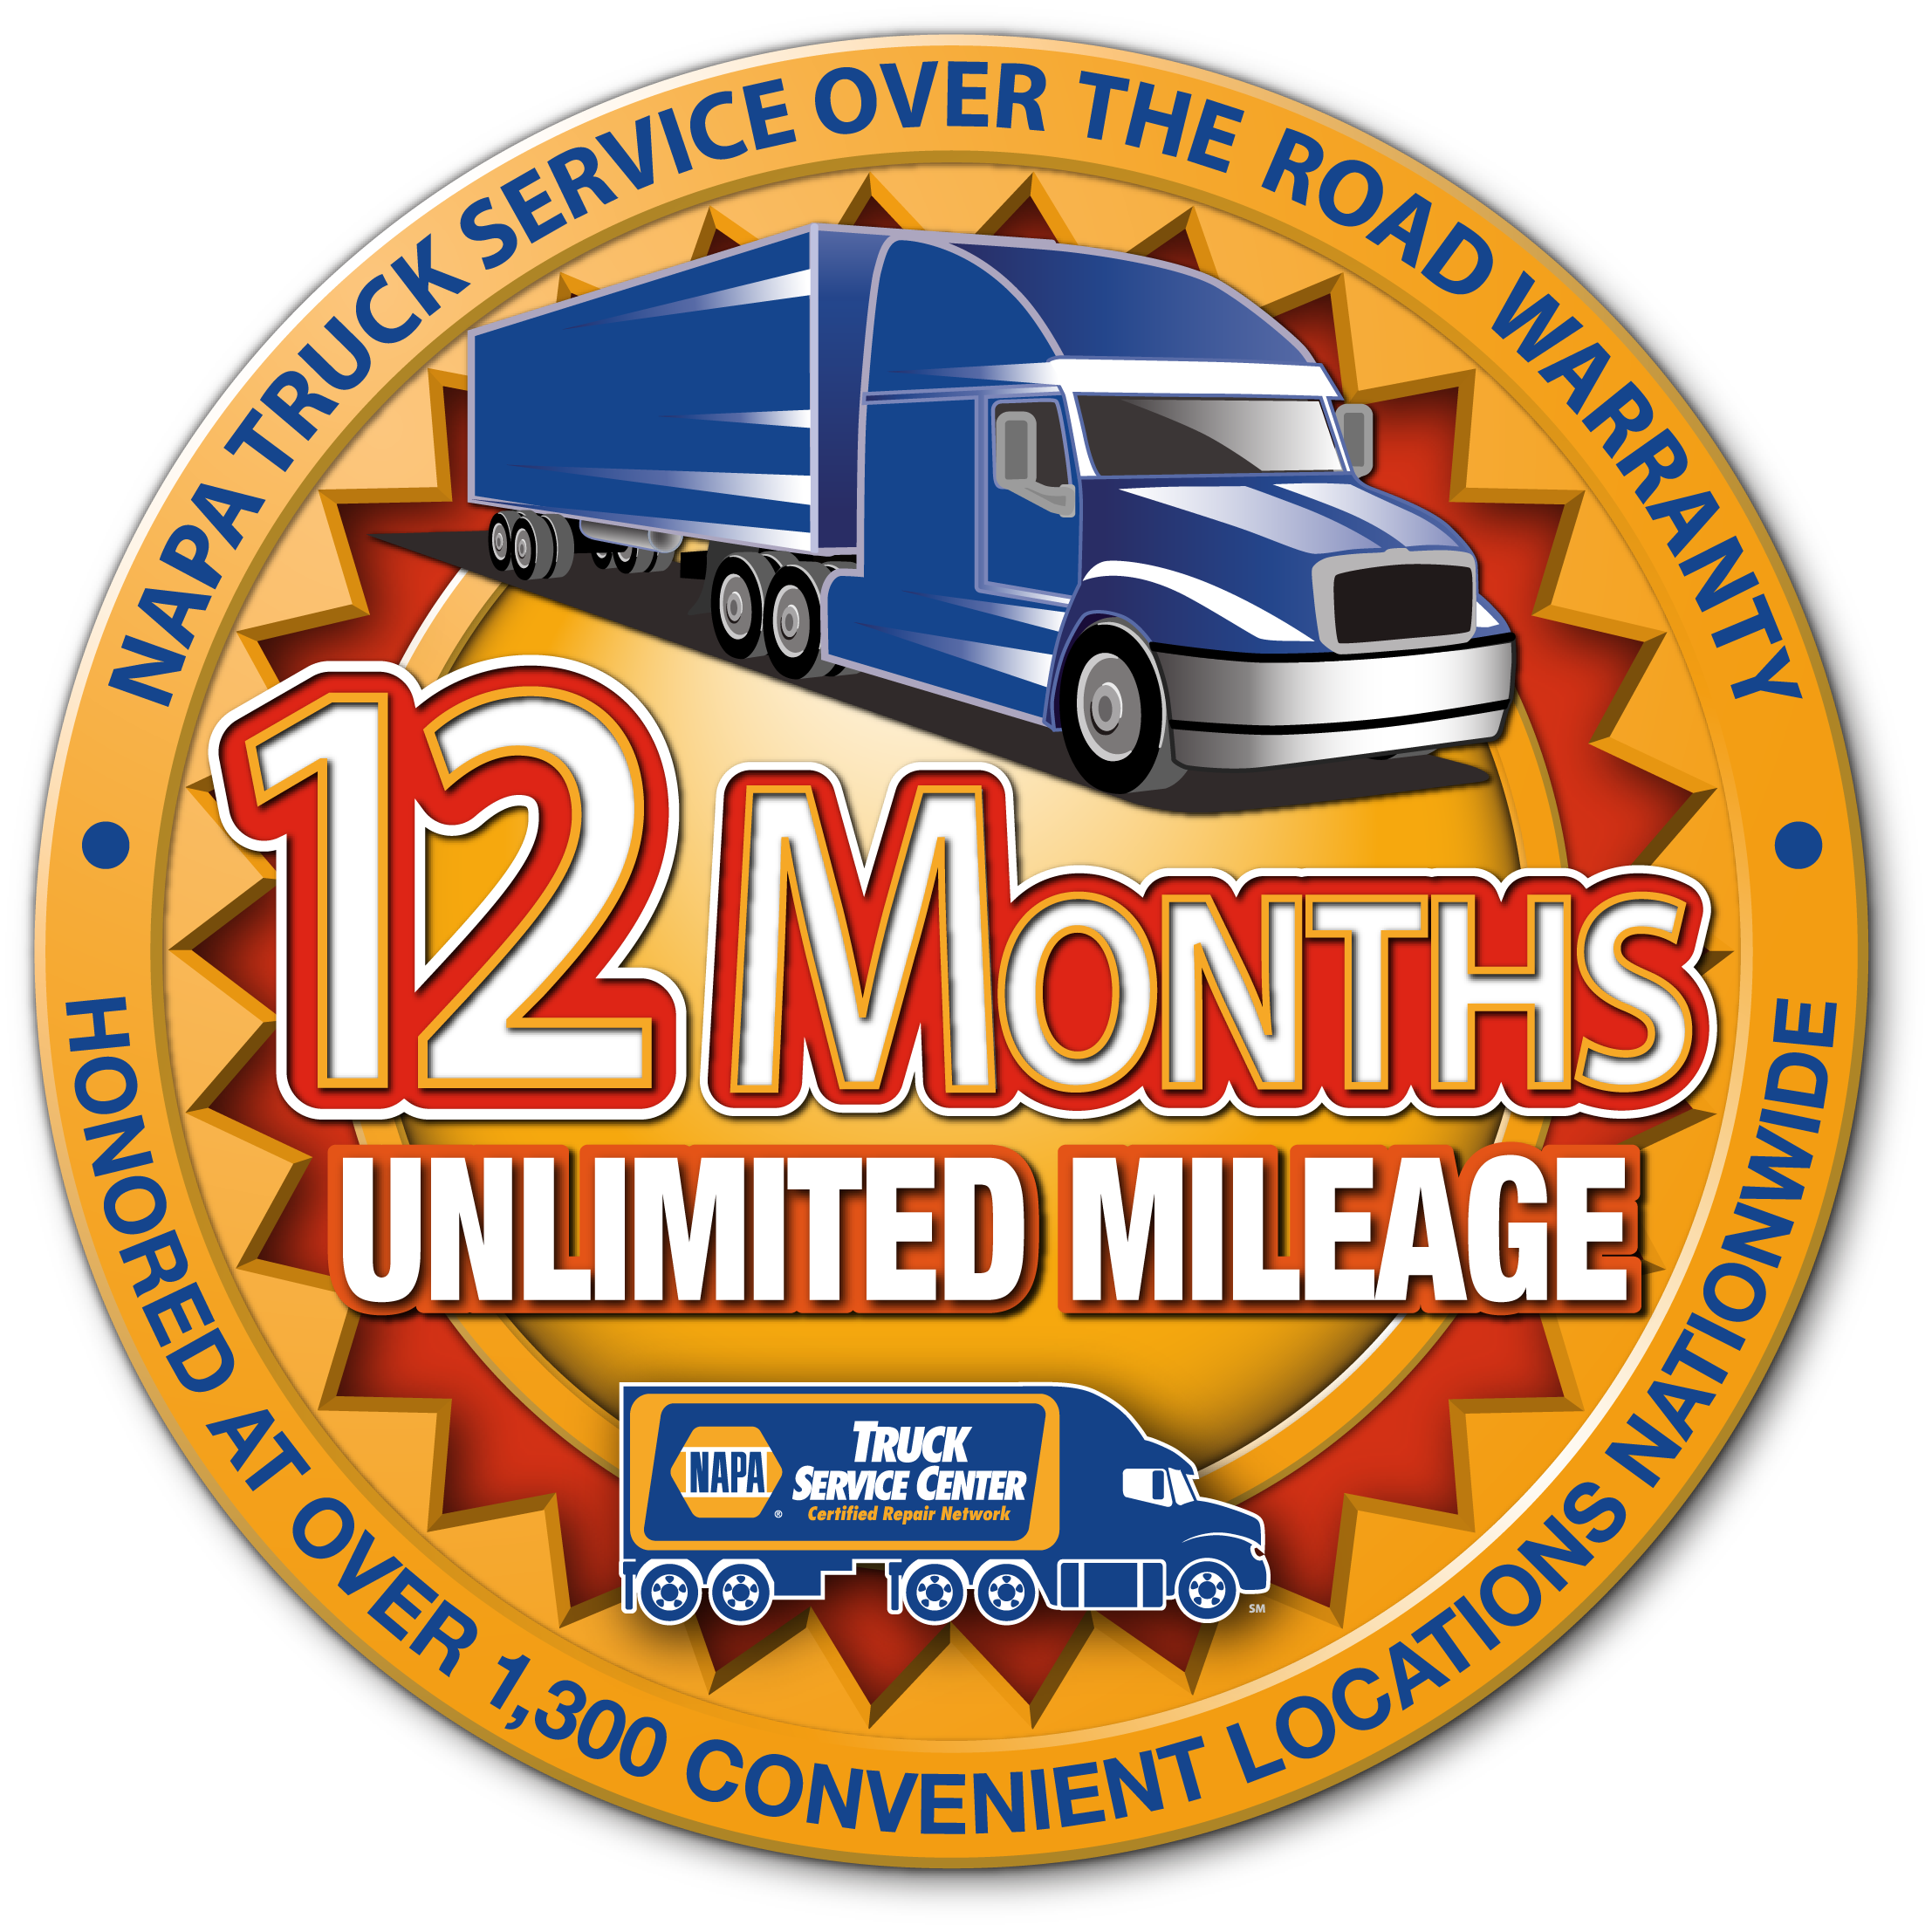 Covers Parts And Labor On Qualifying Repairs And Services For 12 Months With Unlimited Mileage. - Warranty, Transparent background PNG HD thumbnail